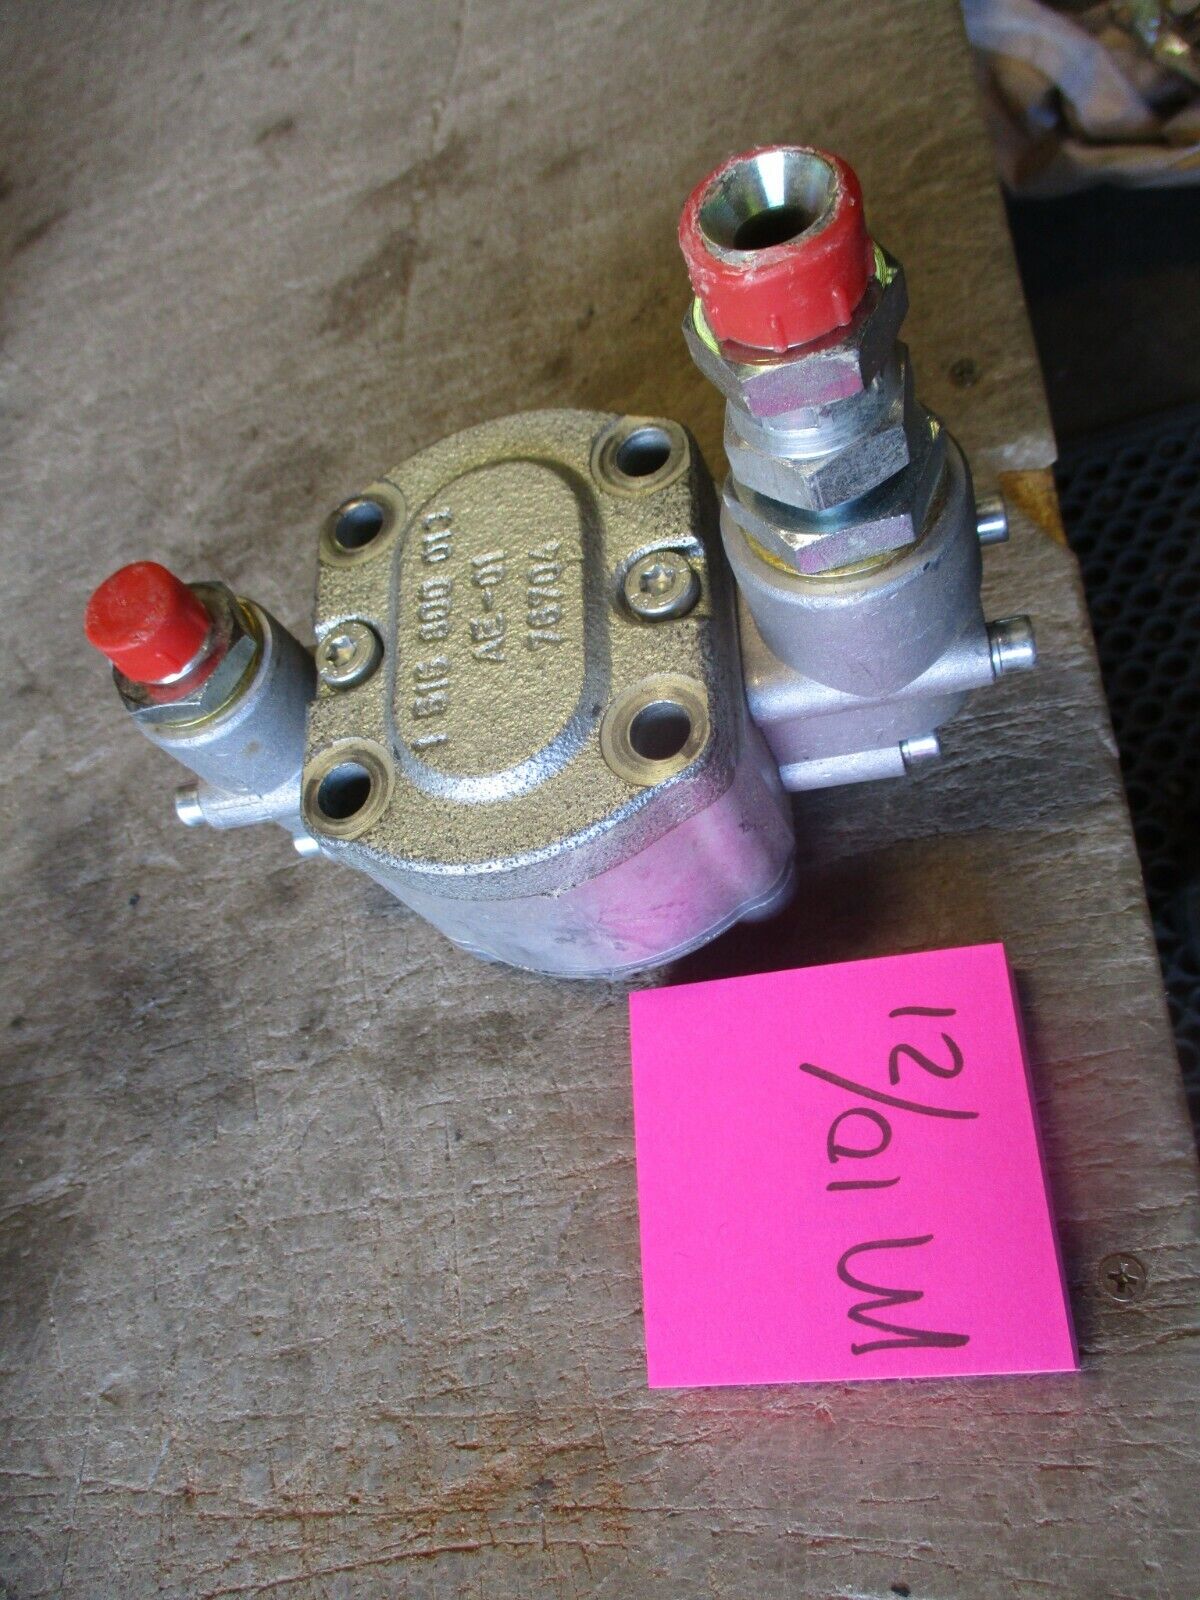 Used? Rexroth Hydraulic Pump 151-800013 76704, JCB Front End Loader???